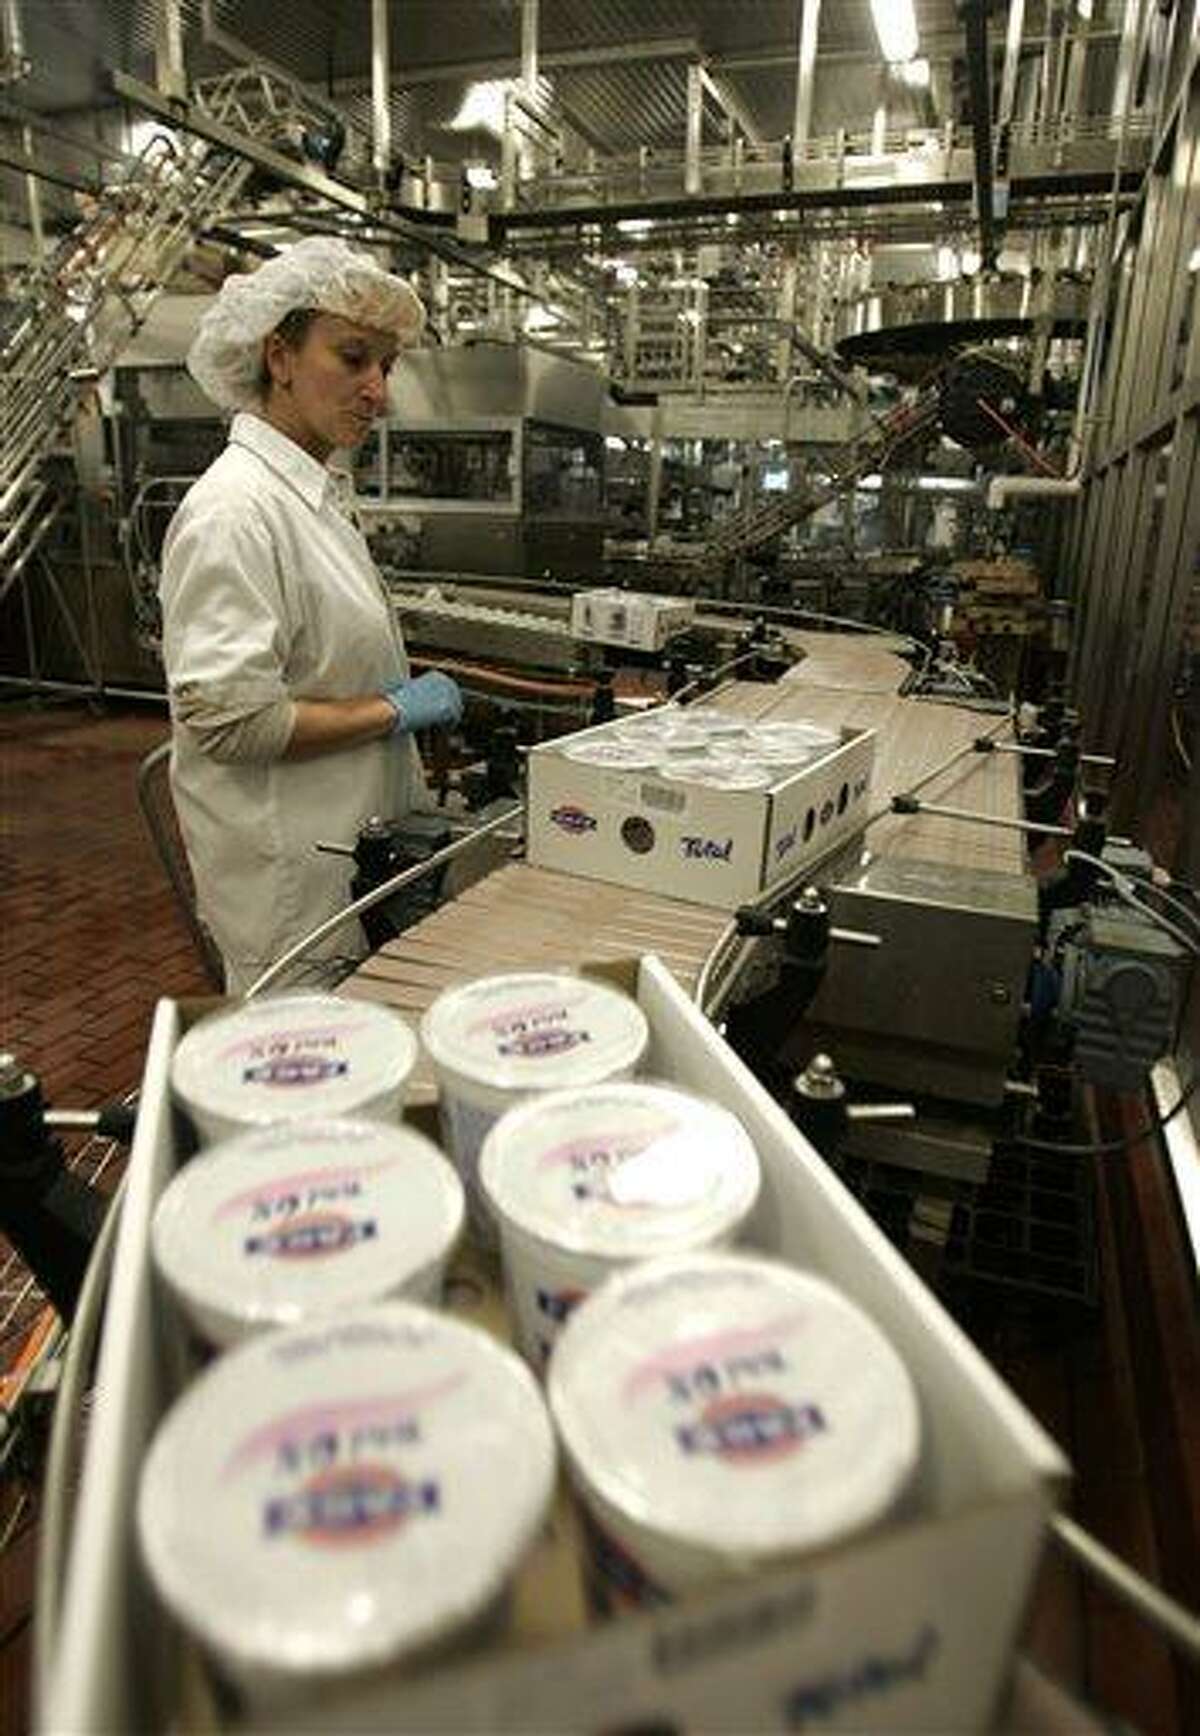 FILE - In this Dec. 10, 2008 file photo, a worker monitors the production line as cases of Fage yogurt are produced in Johnstown, N.Y. Whey, a byproduct of Greek yogurt production, is collected at Gloversville-Johnstown wastewater plant west of Albany, N.Y., and mixed with anaerobic bacteria. The resulting methane gas becomes combustible fuel that generates nearly enough electricity to power the plant. (AP Photo/Mike Groll, File)